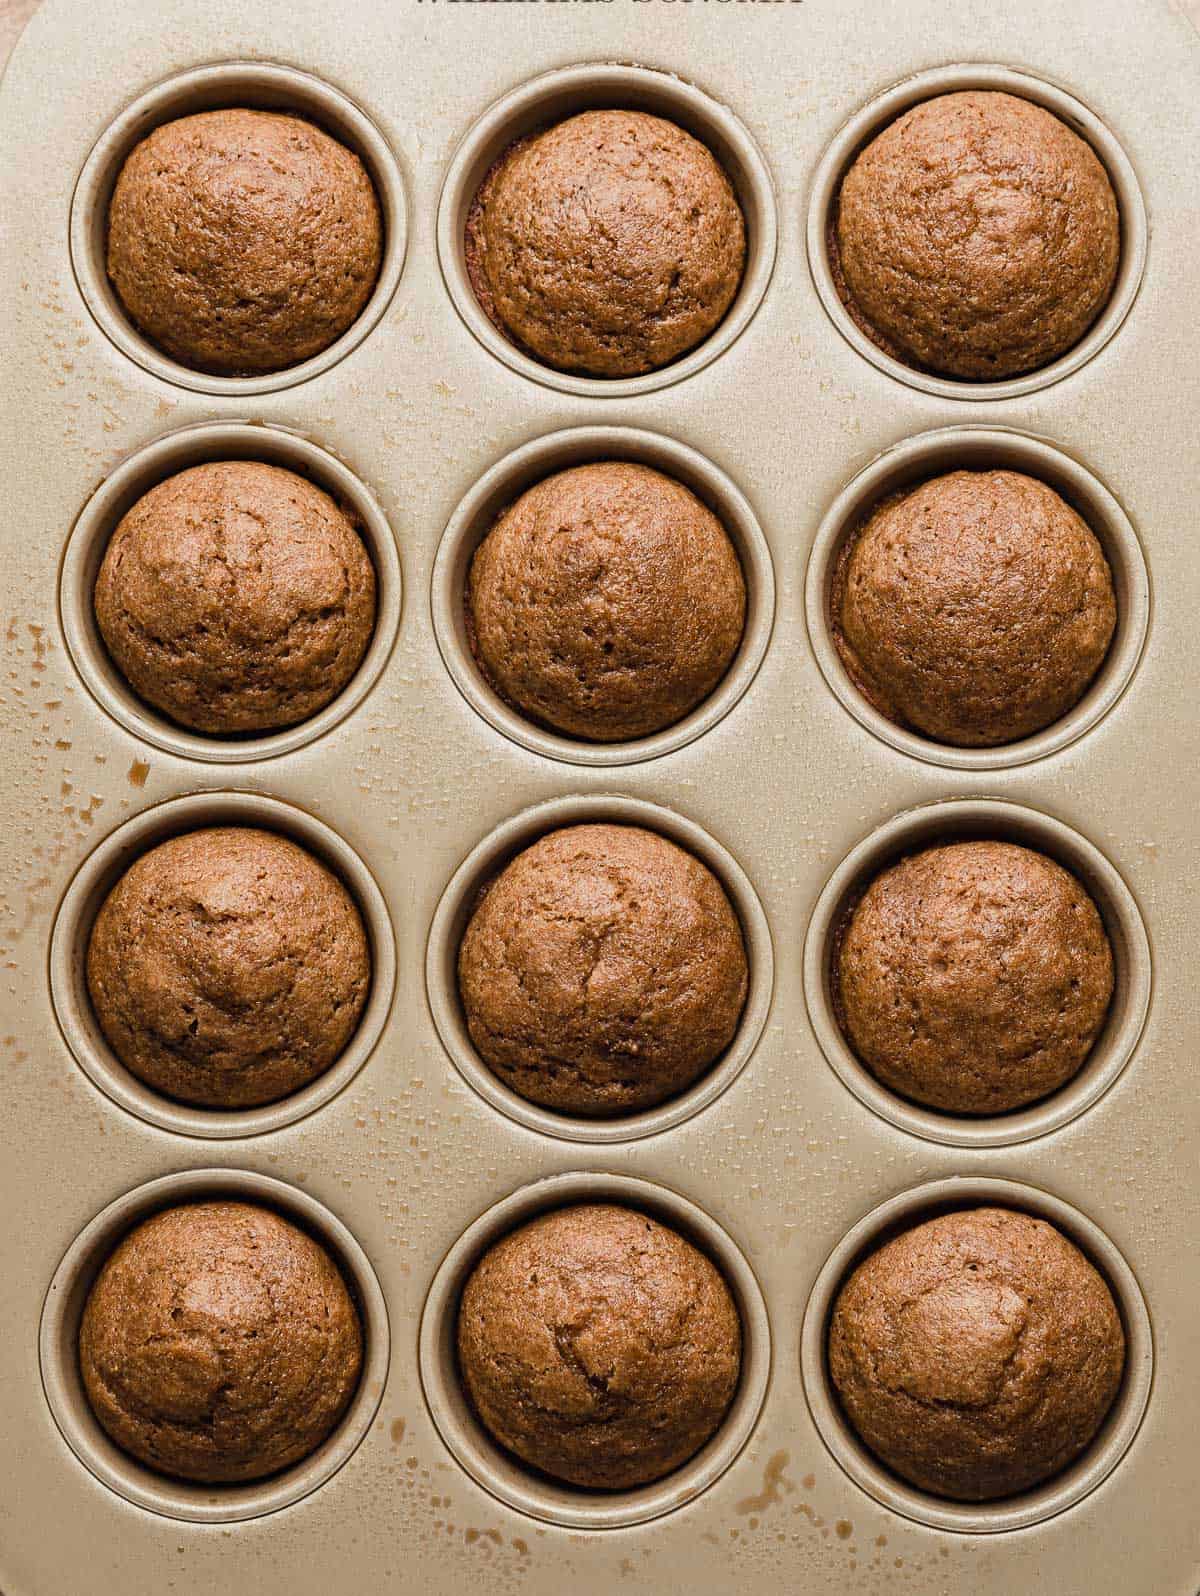 Baked all bran muffins made with buttermilk in a 12 capacity muffin tin.